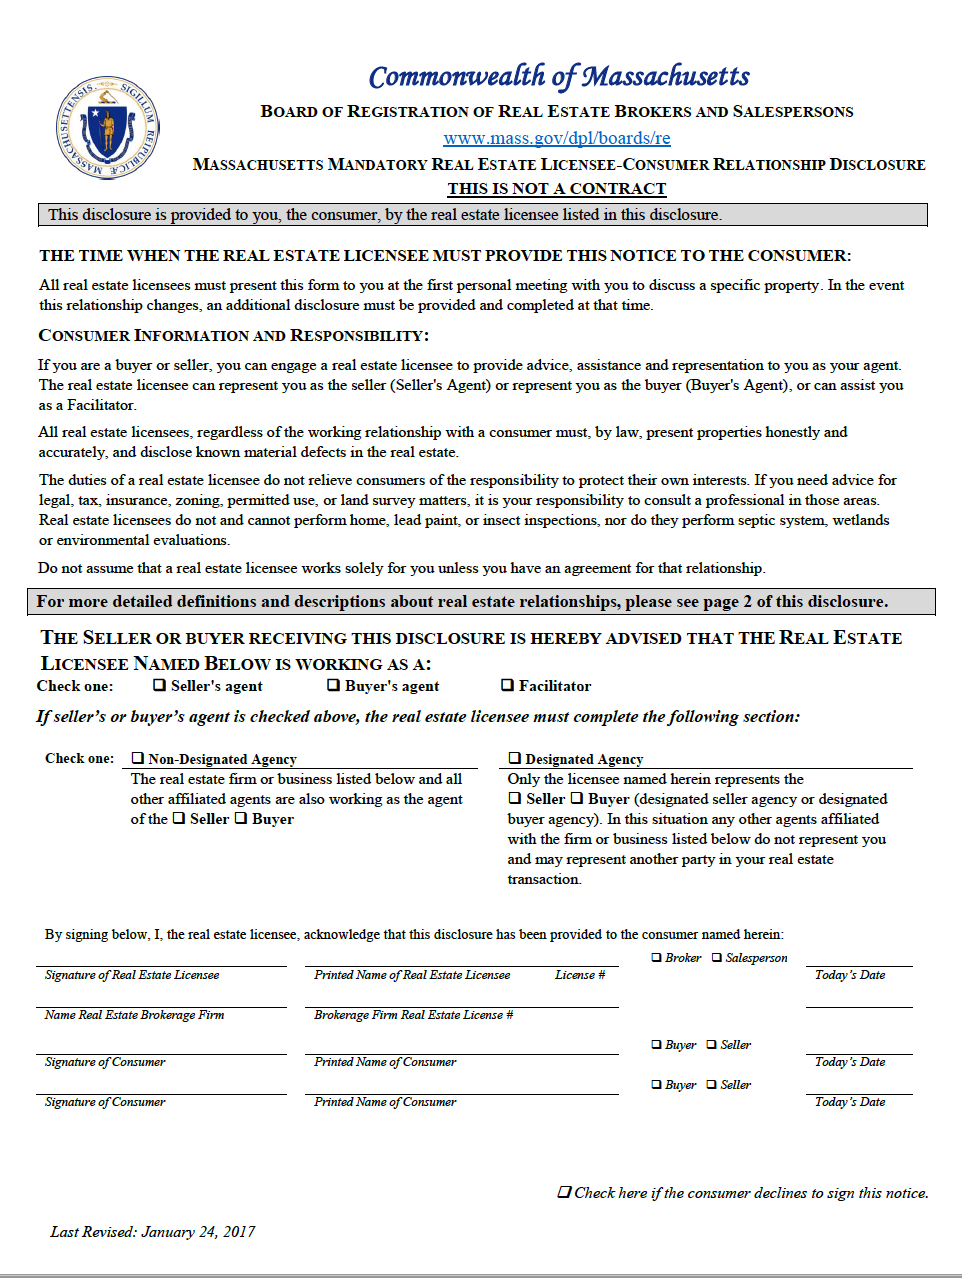 MA Mandatory Real Estate Licensee Consumer Relationship Disclosure Form